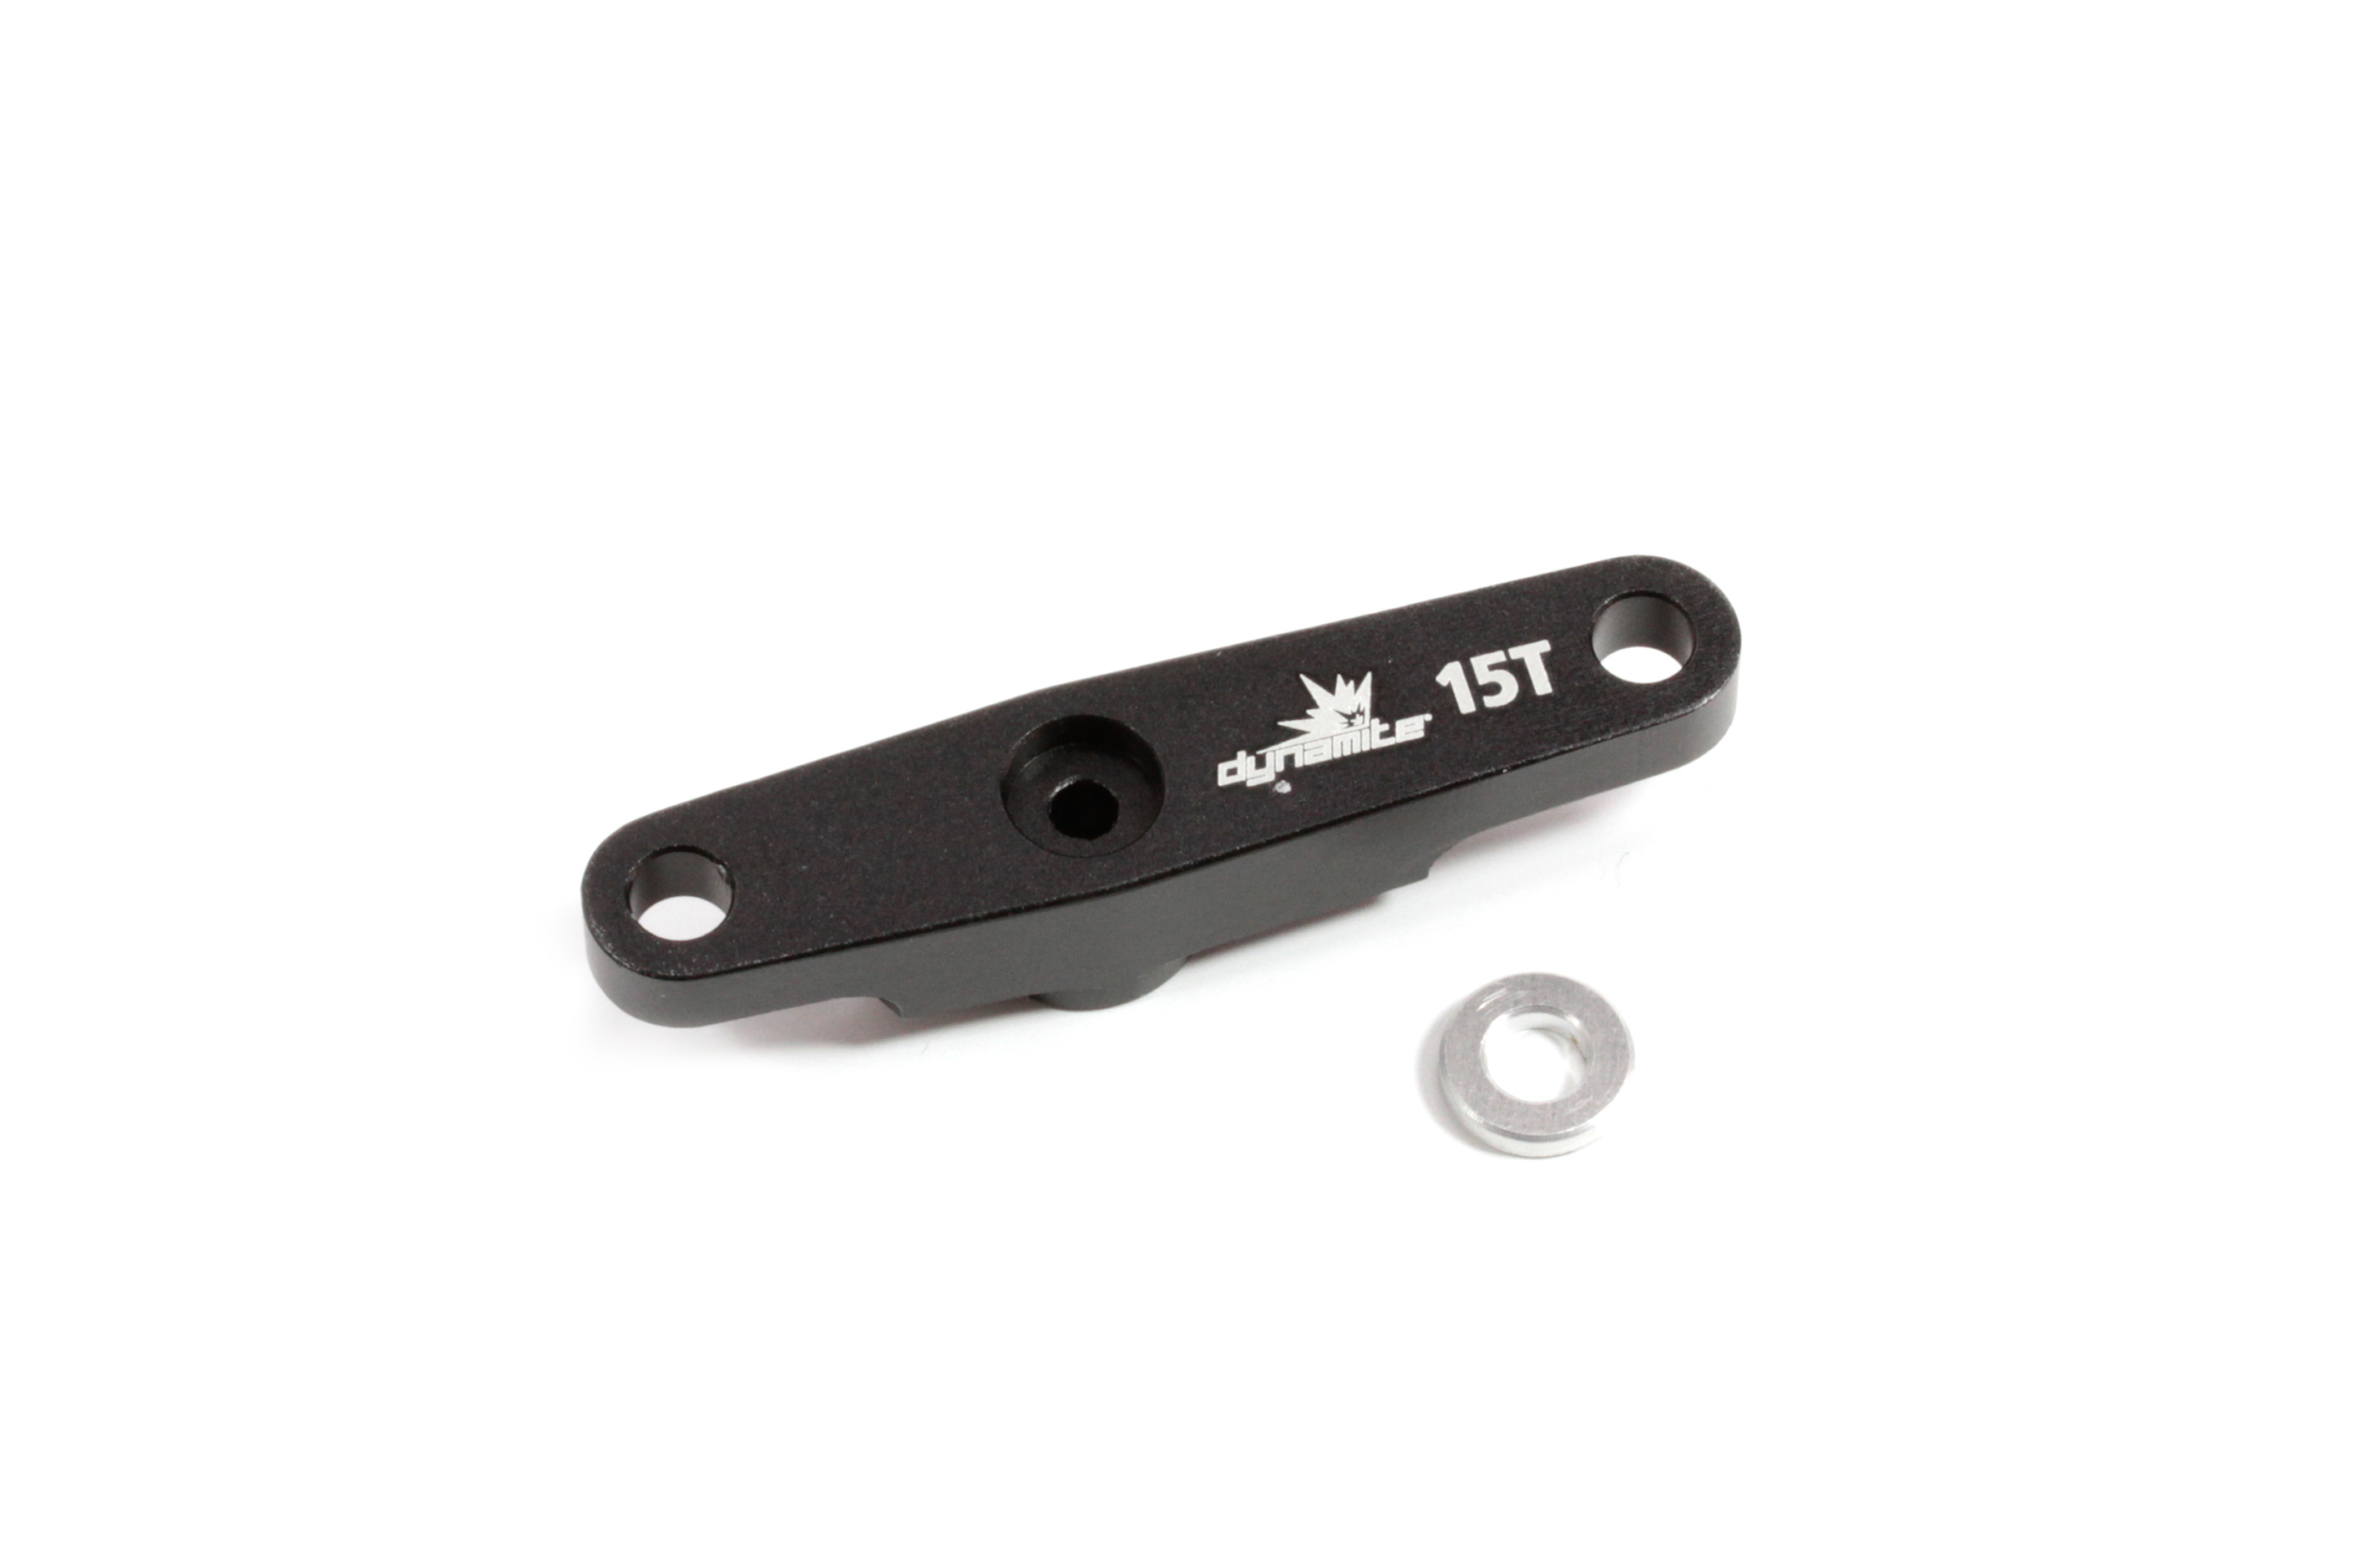 DYNR0110 Dynamite Alloy Throttle Servo arm 15T for Losi 5ive-T, TLR 5ive-B and Mini WRC